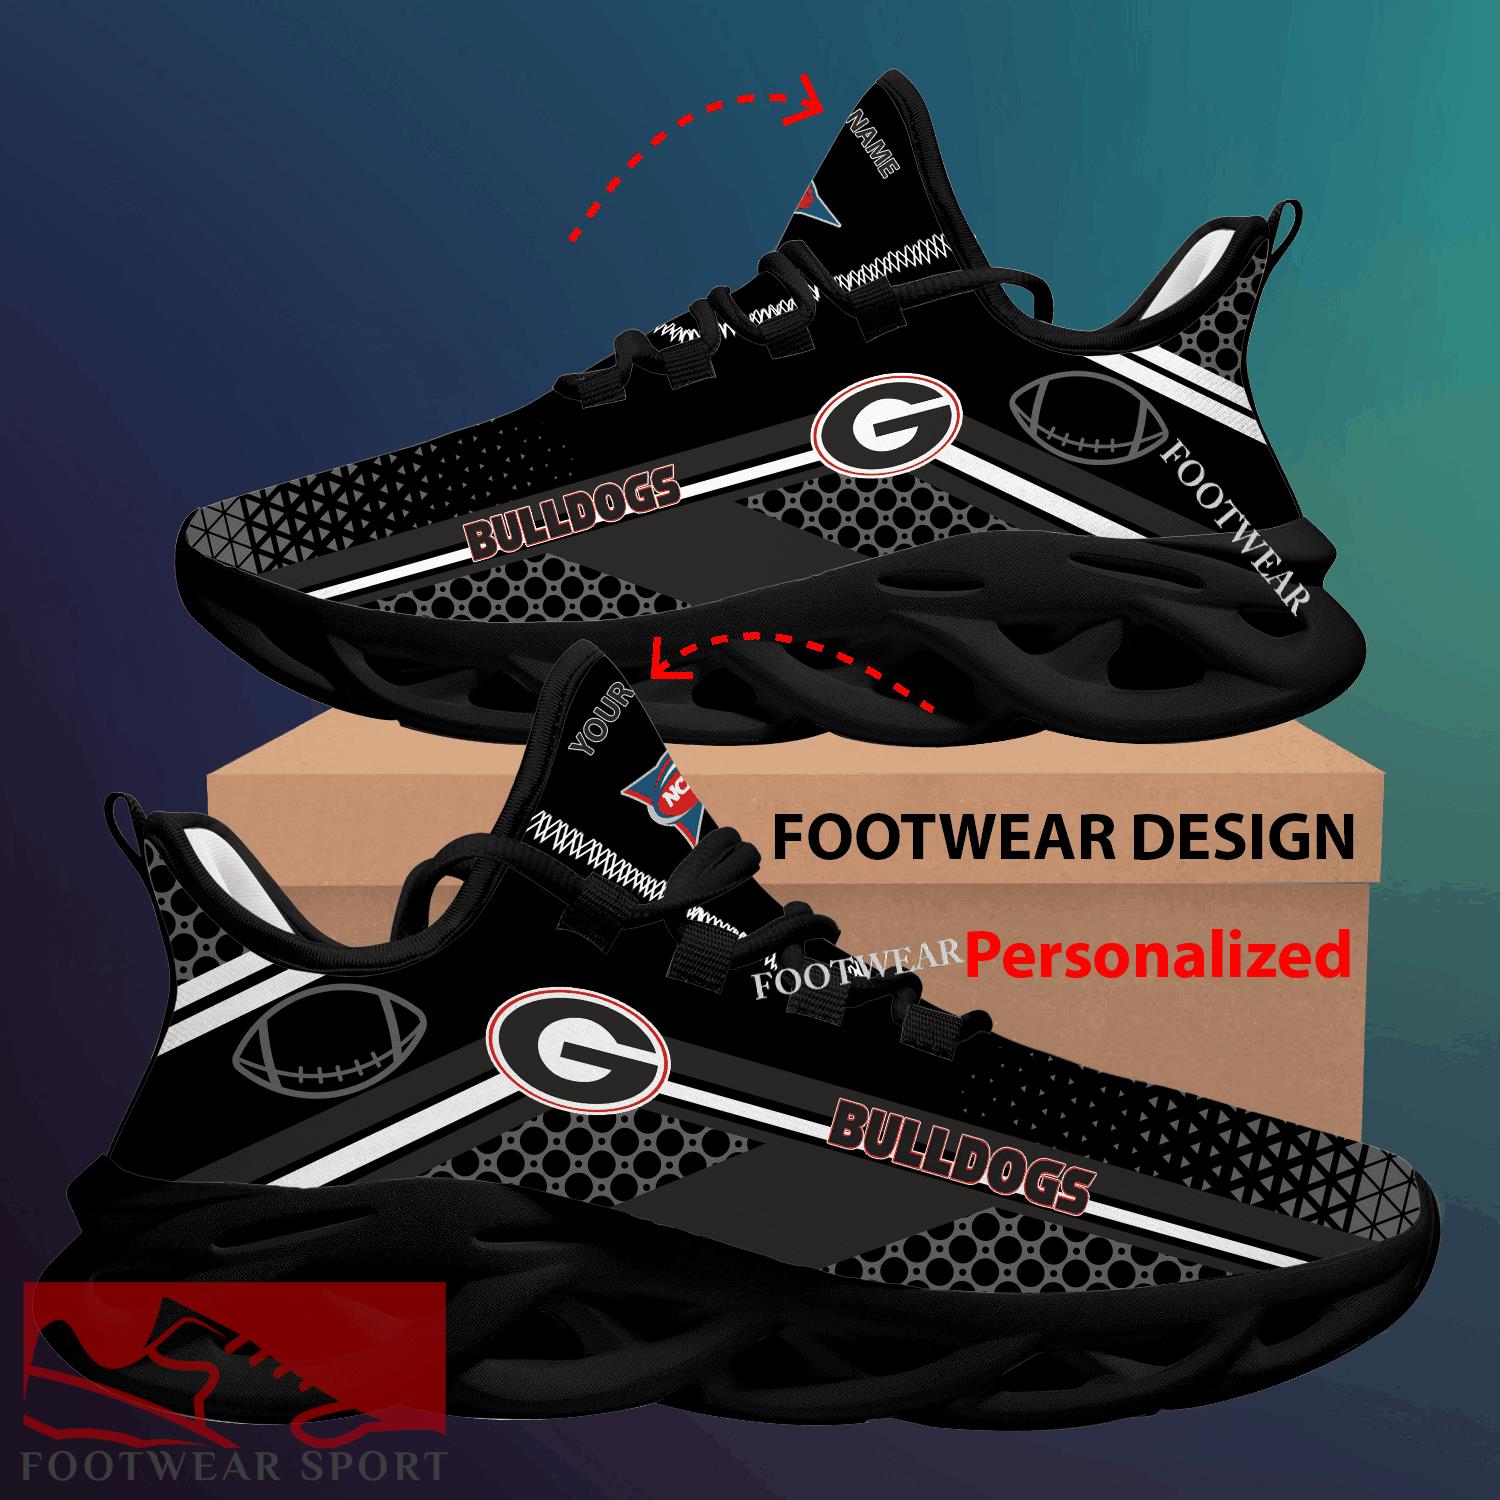 Georgia Bulldogs Max Soul Shoes New Season Personalized For Men Women Running Sneaker Imagery Fans - NCAA Georgia Bulldogs Max Soul Shoes New Season Personalized Photo 2